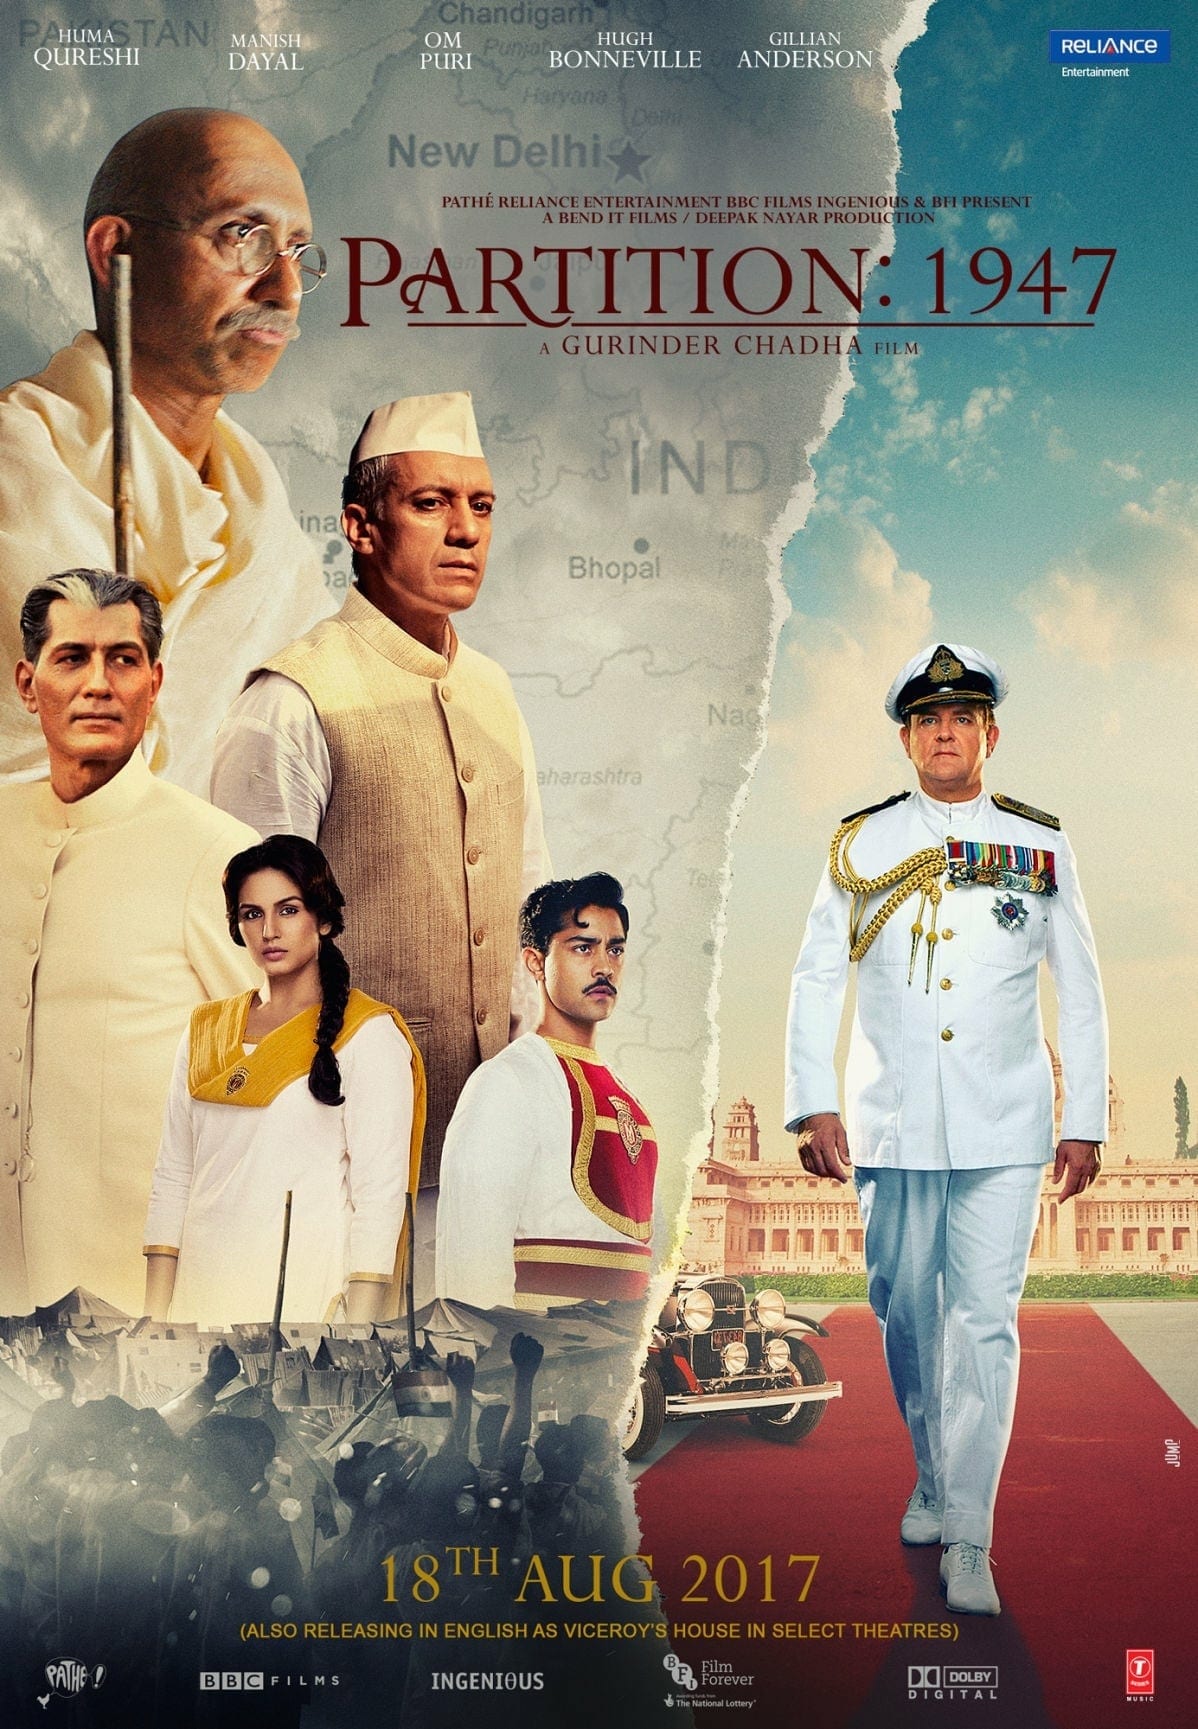 Poster for the movie "Viceroy's House"